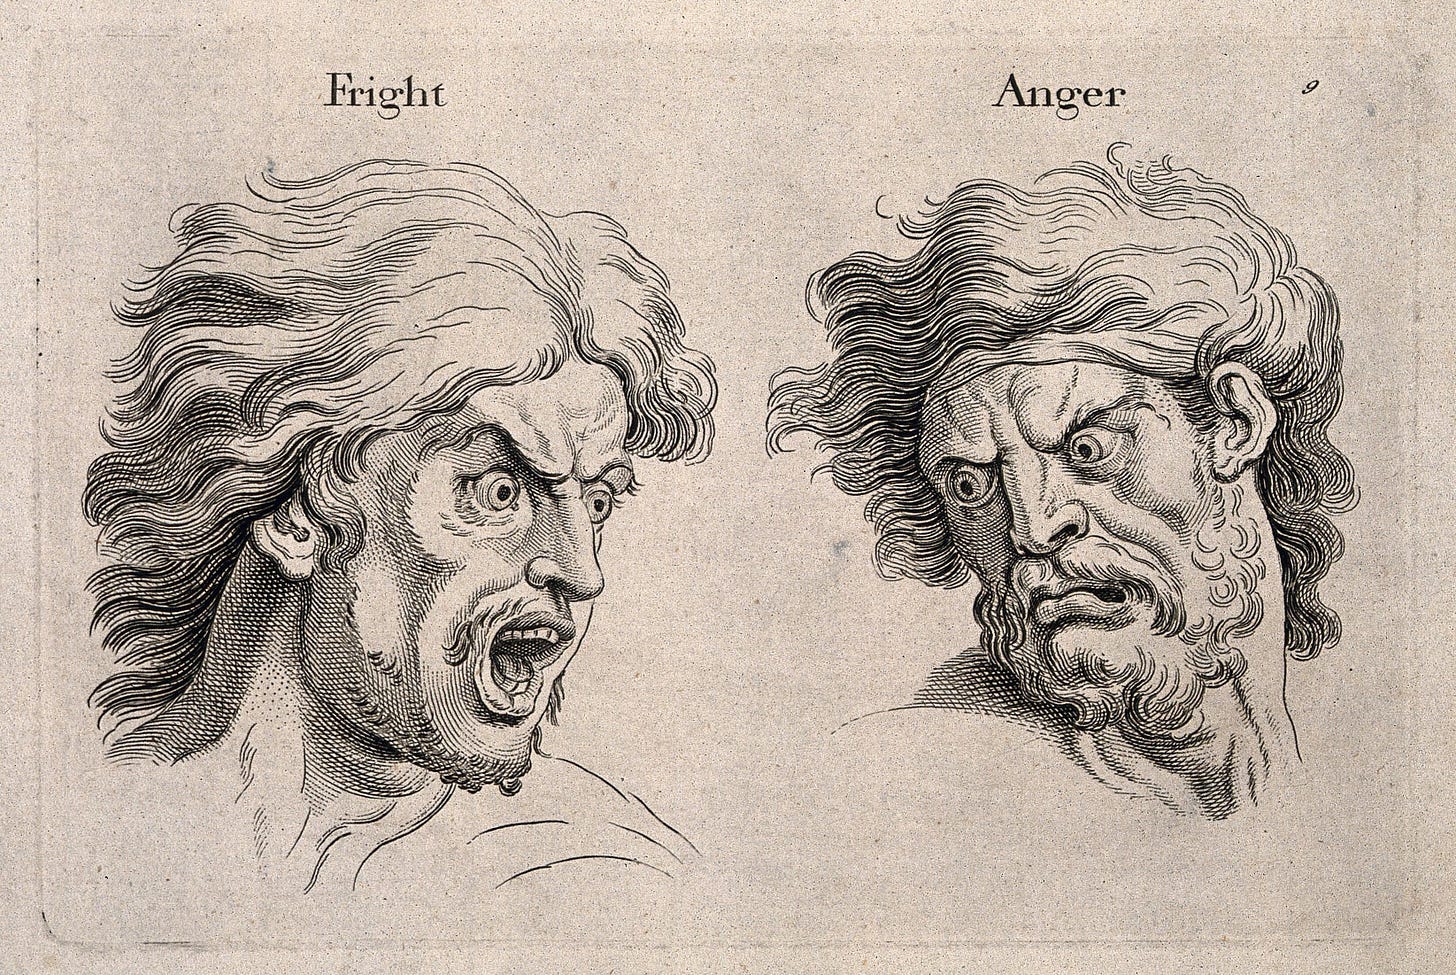 A Frightened and an Angry Face, engraving, c. 1760, after C. Le Brun